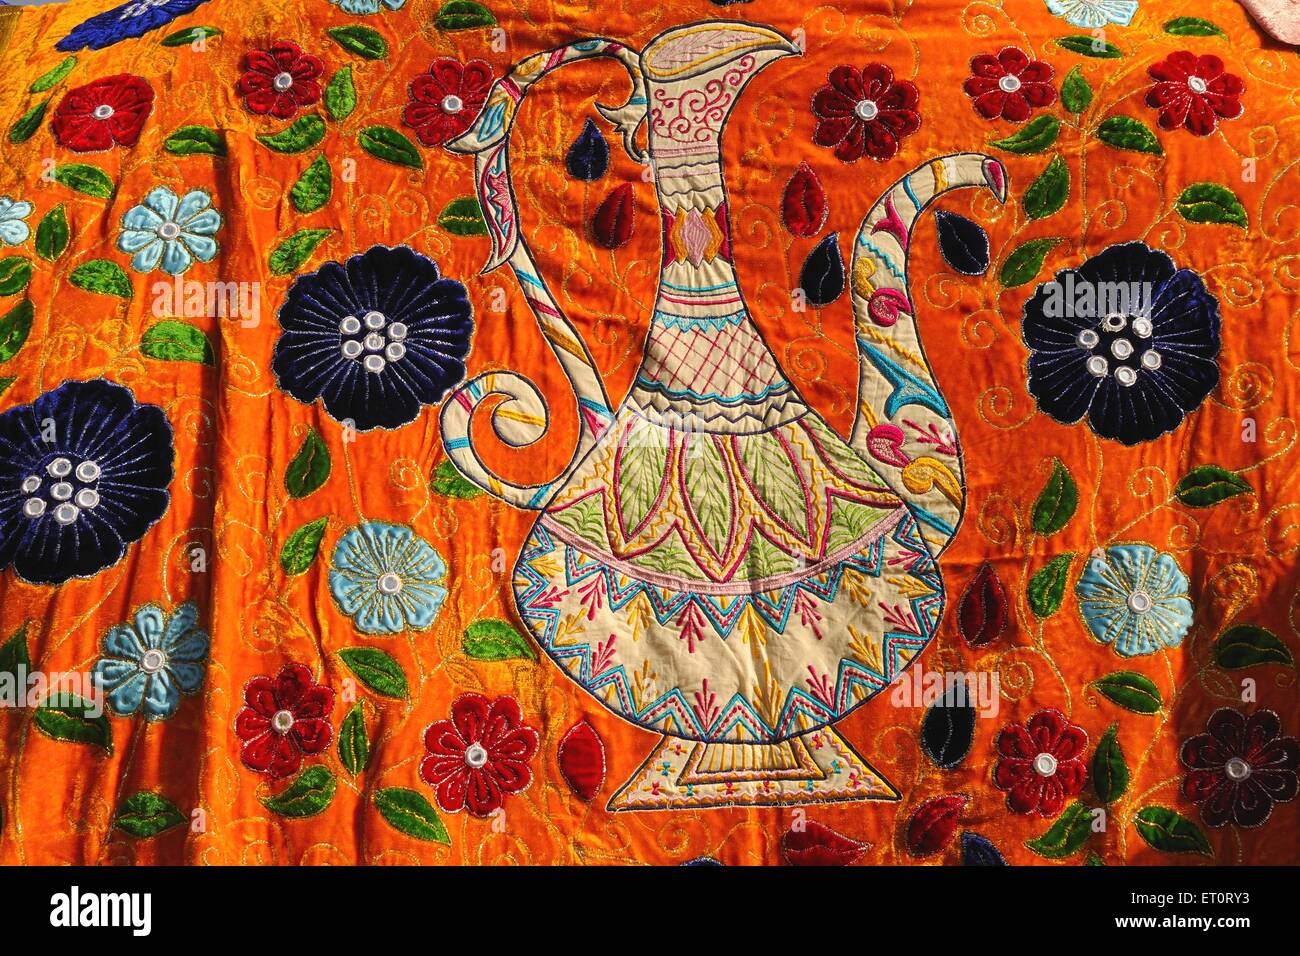 Embroidery of flowers on cloth ; Rajasthan ; India Stock Photo